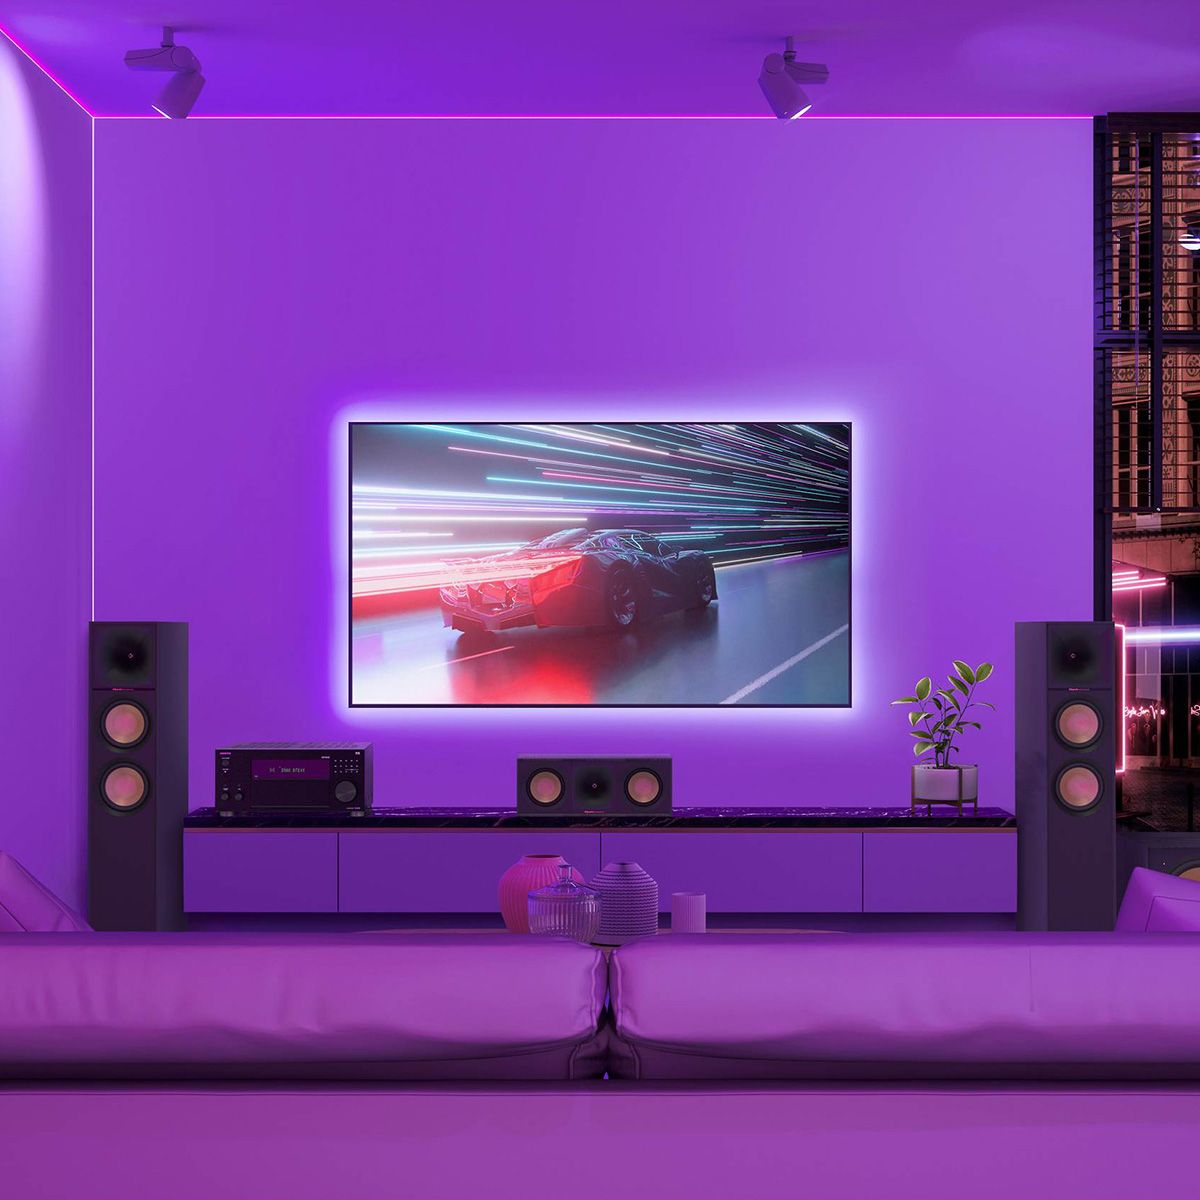 Onkyo TX-RZ70 Home Theater Receiver, cinematic view